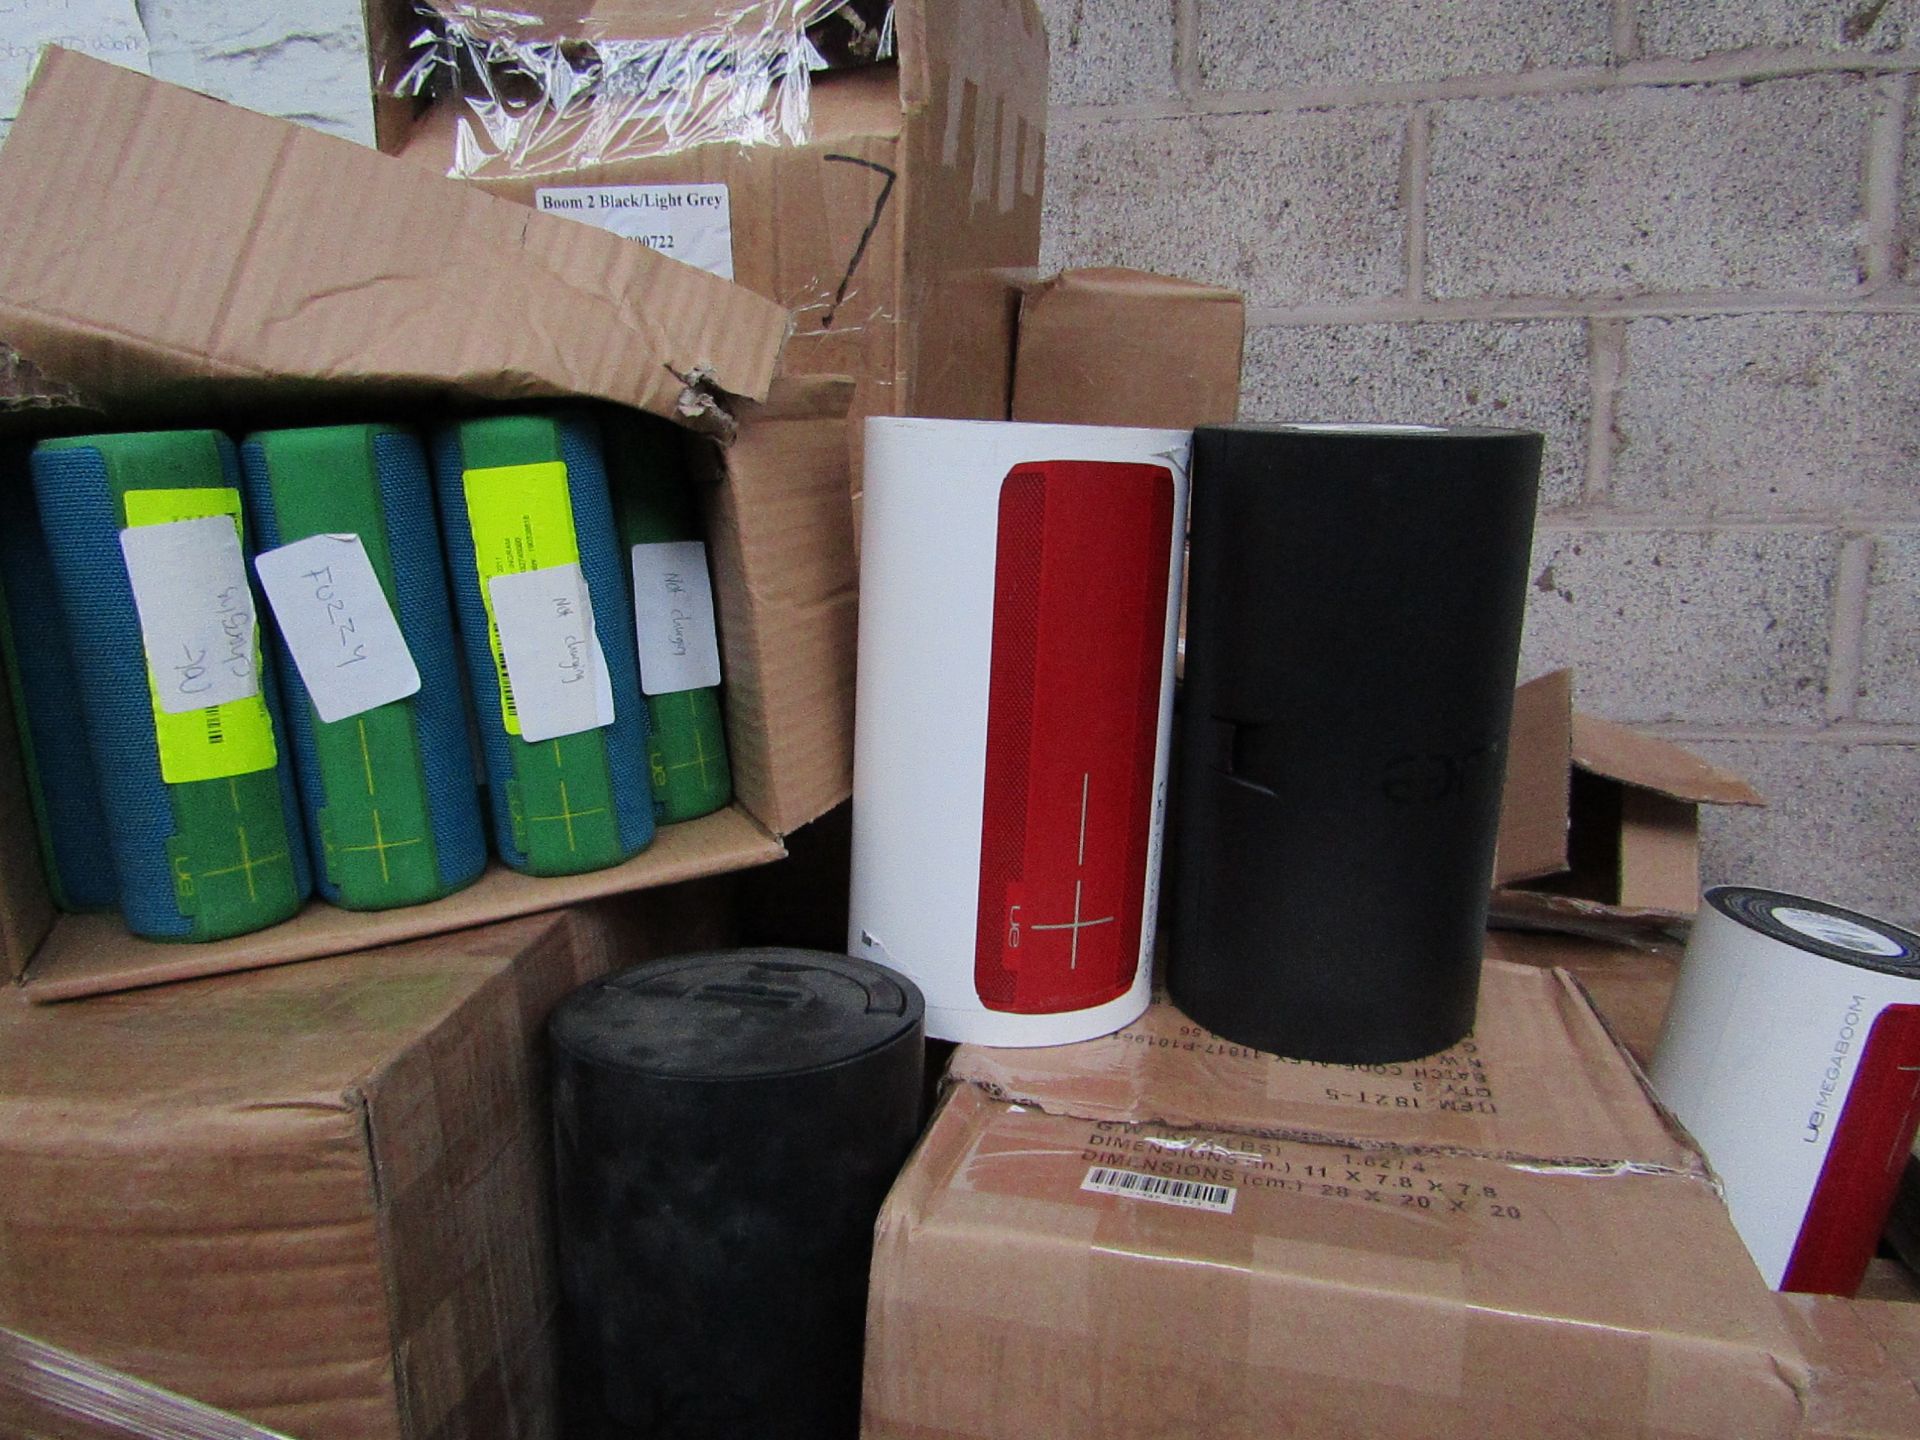 6X UE Megaboom speaker, unchecked. PLEASE NOTE, this lot is picked at random and you may receive a